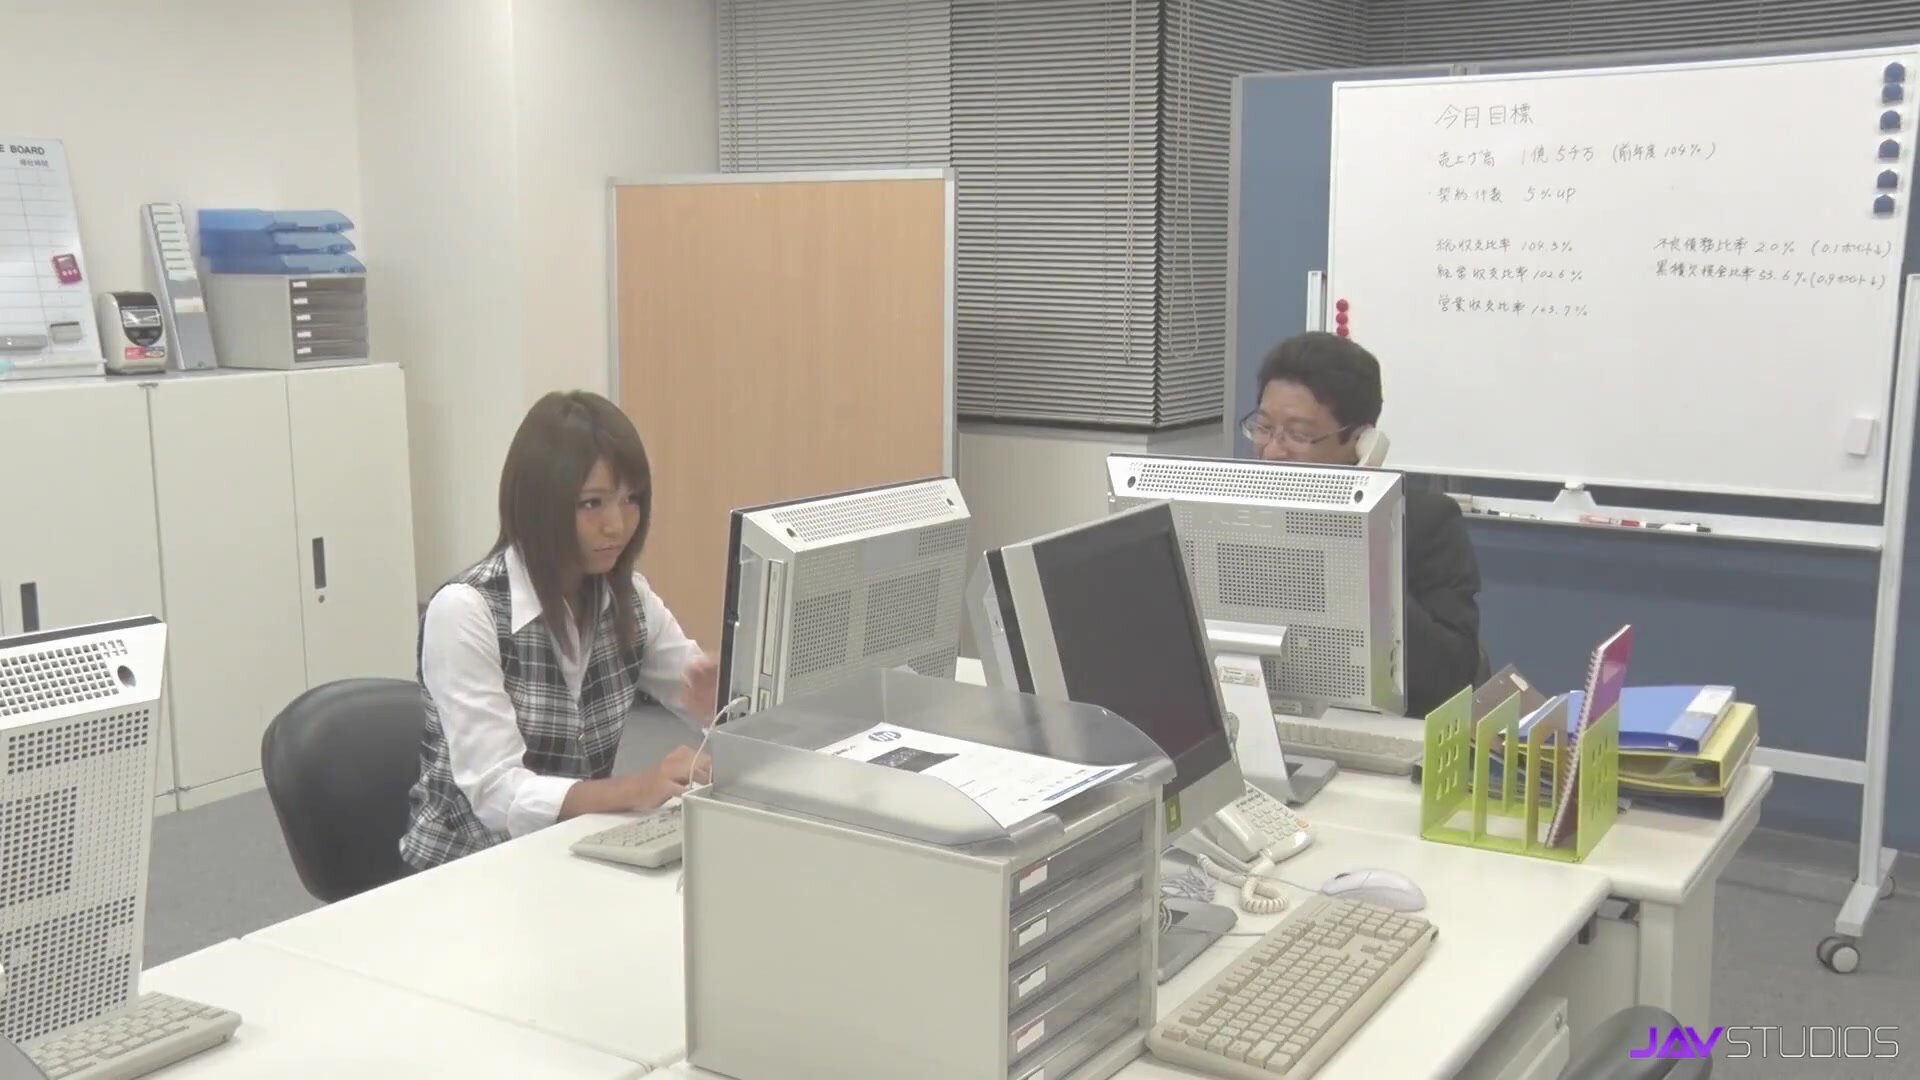 Another Day At The Office - Shino Aoi, Ippei Nakata